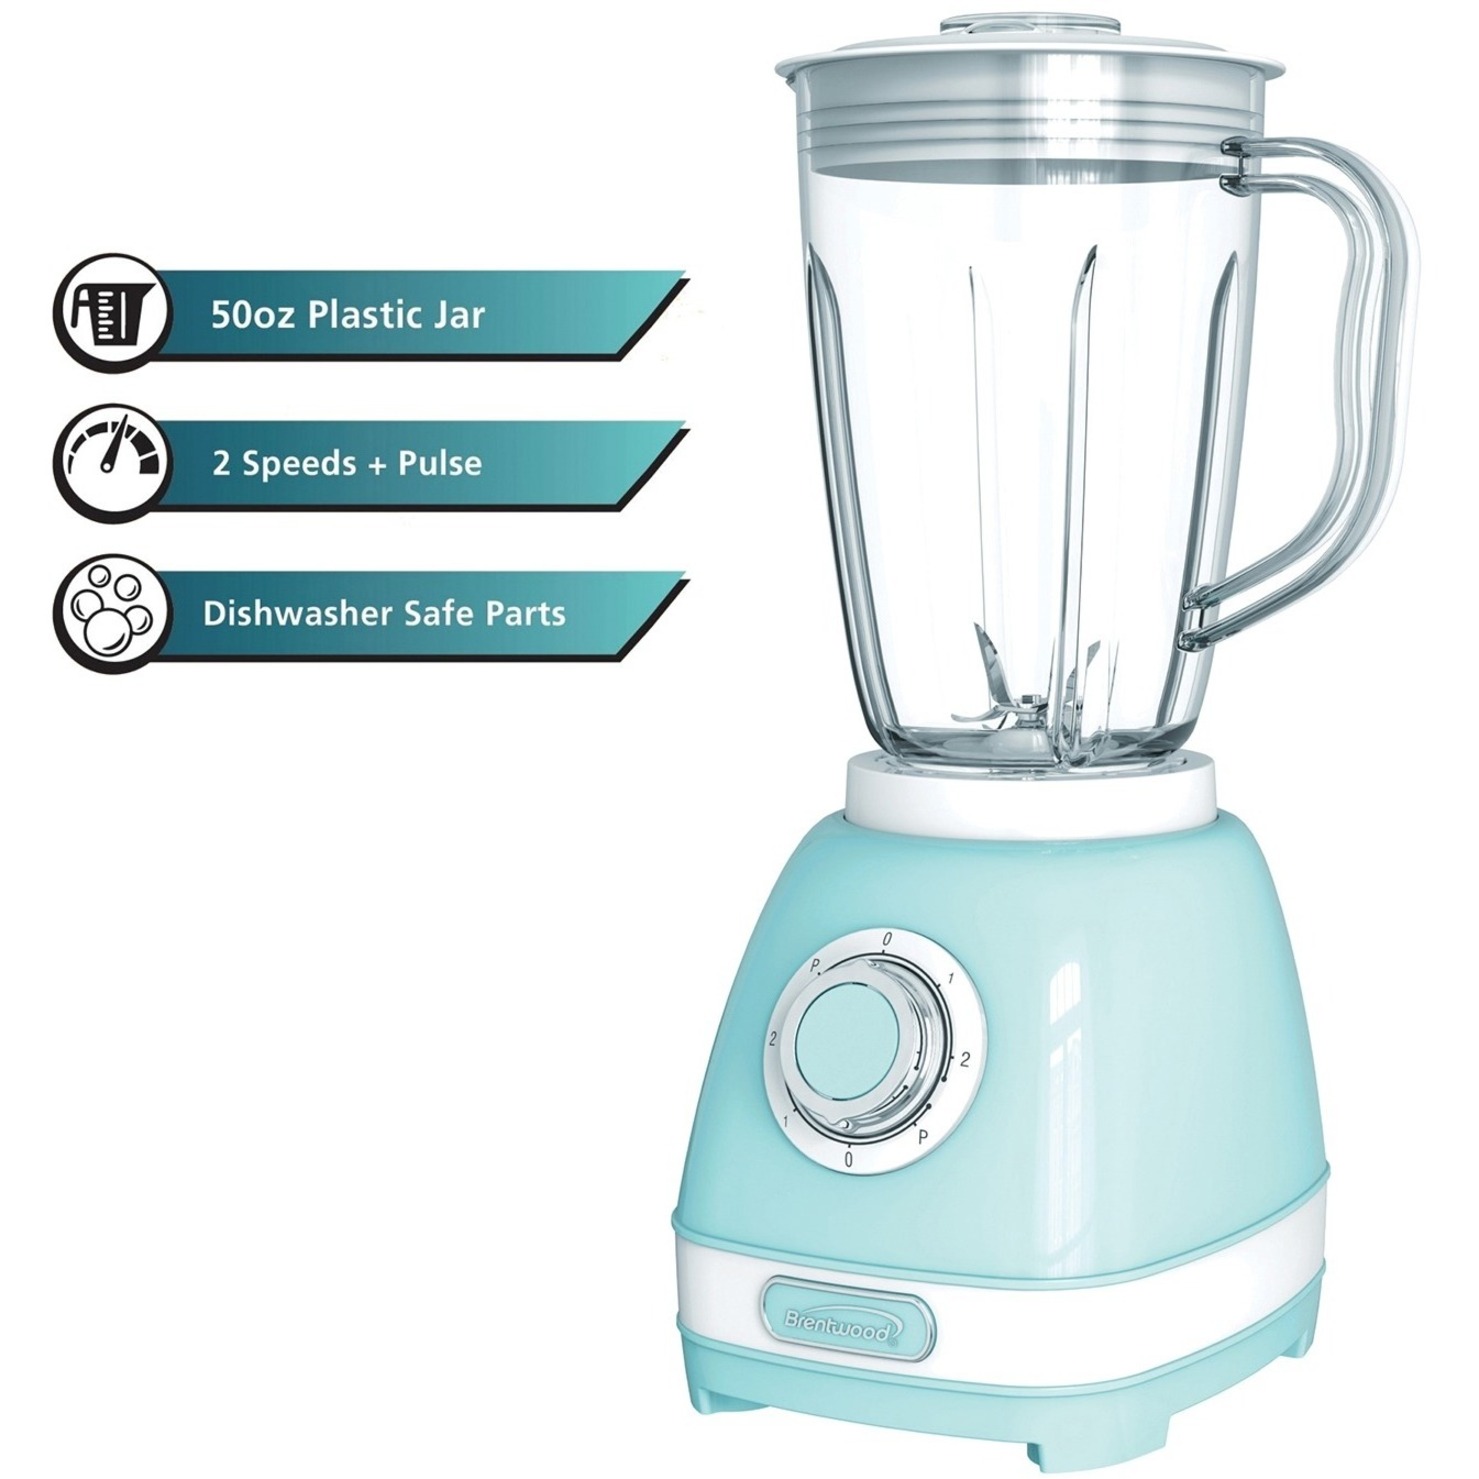 Brentwood Appliances Jb-330bl 2-speed Retro Blender With 50-Ounce Plastic Jar - image 3 of 7